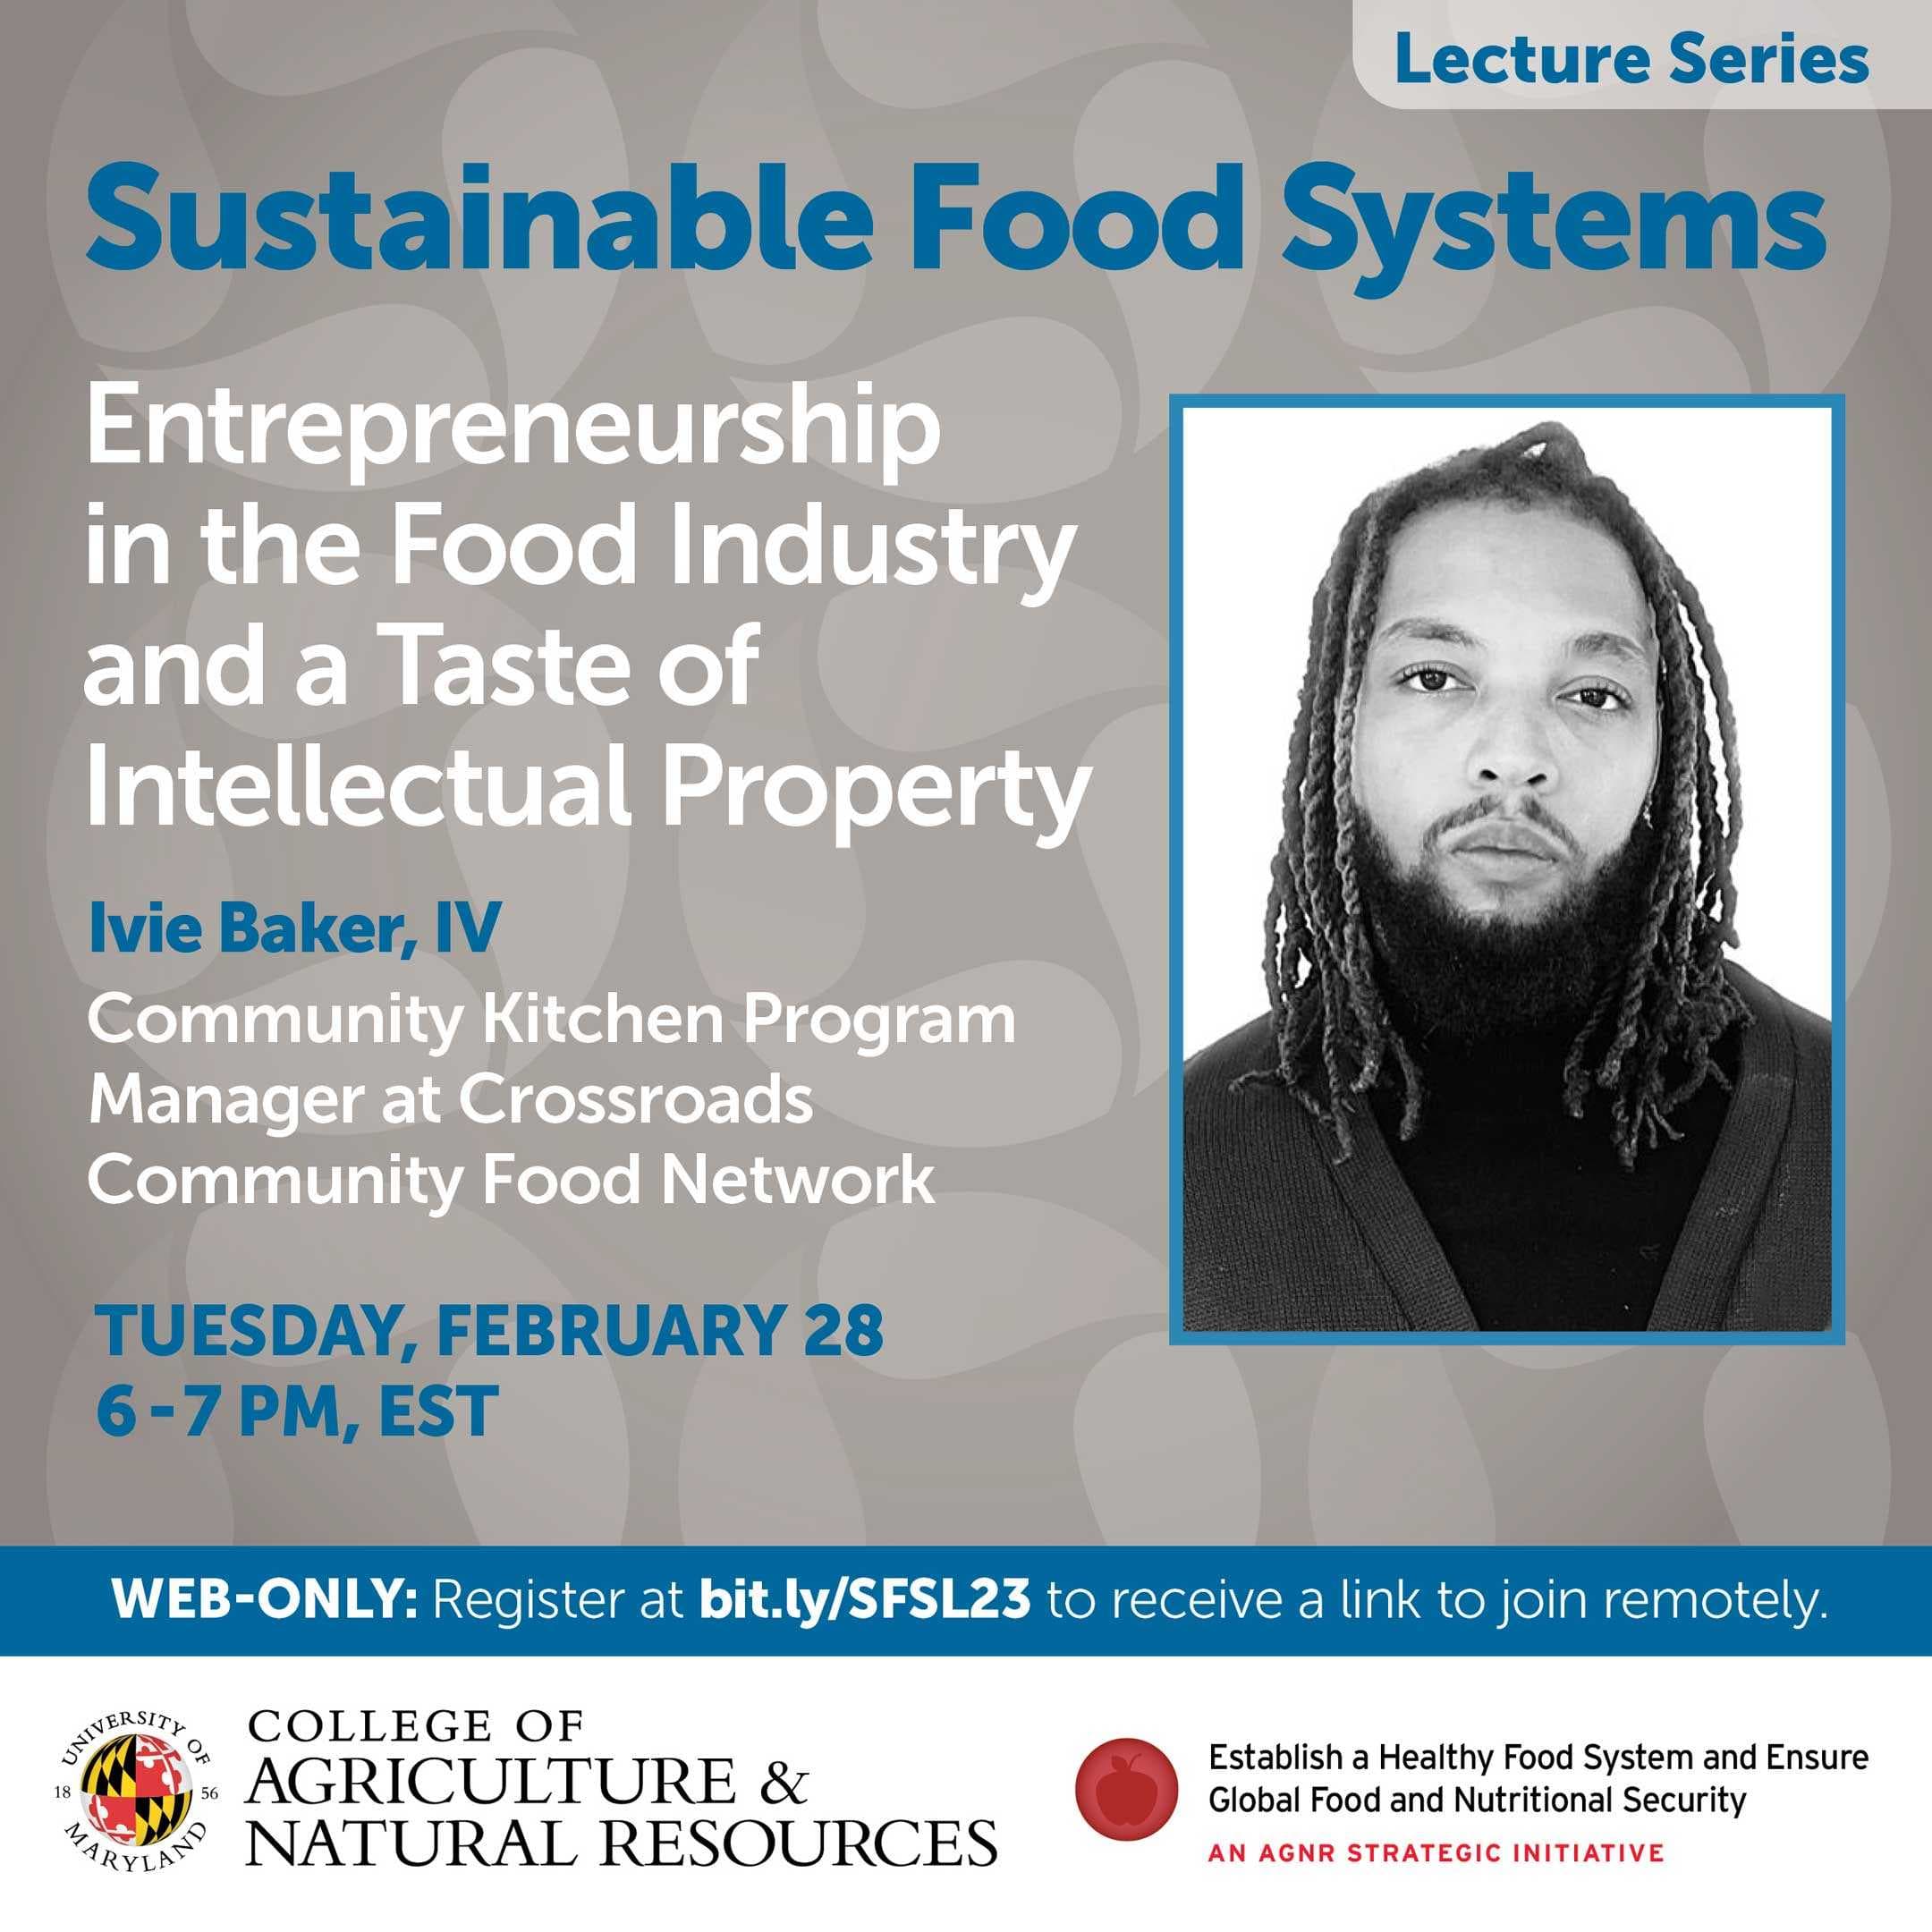 Sustainable Food Systems Lectures Series graphic